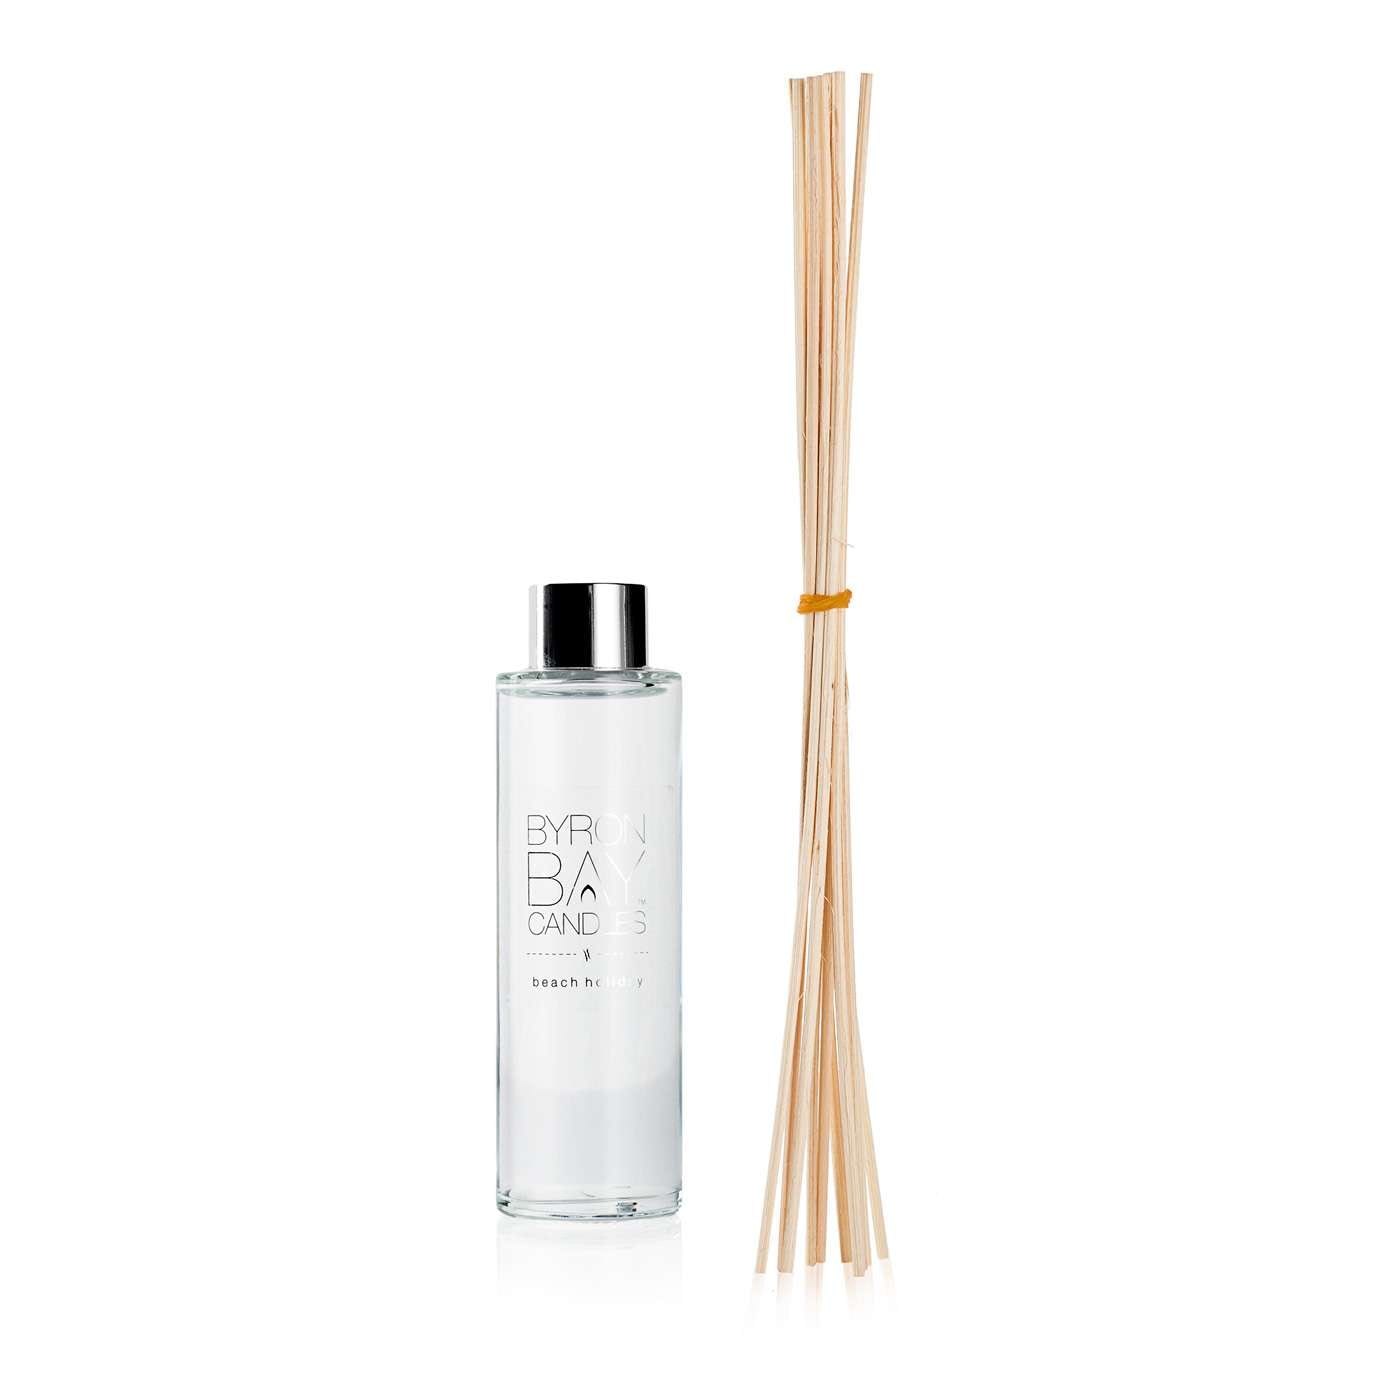 Reed Diffuser Refills with new reed sticks